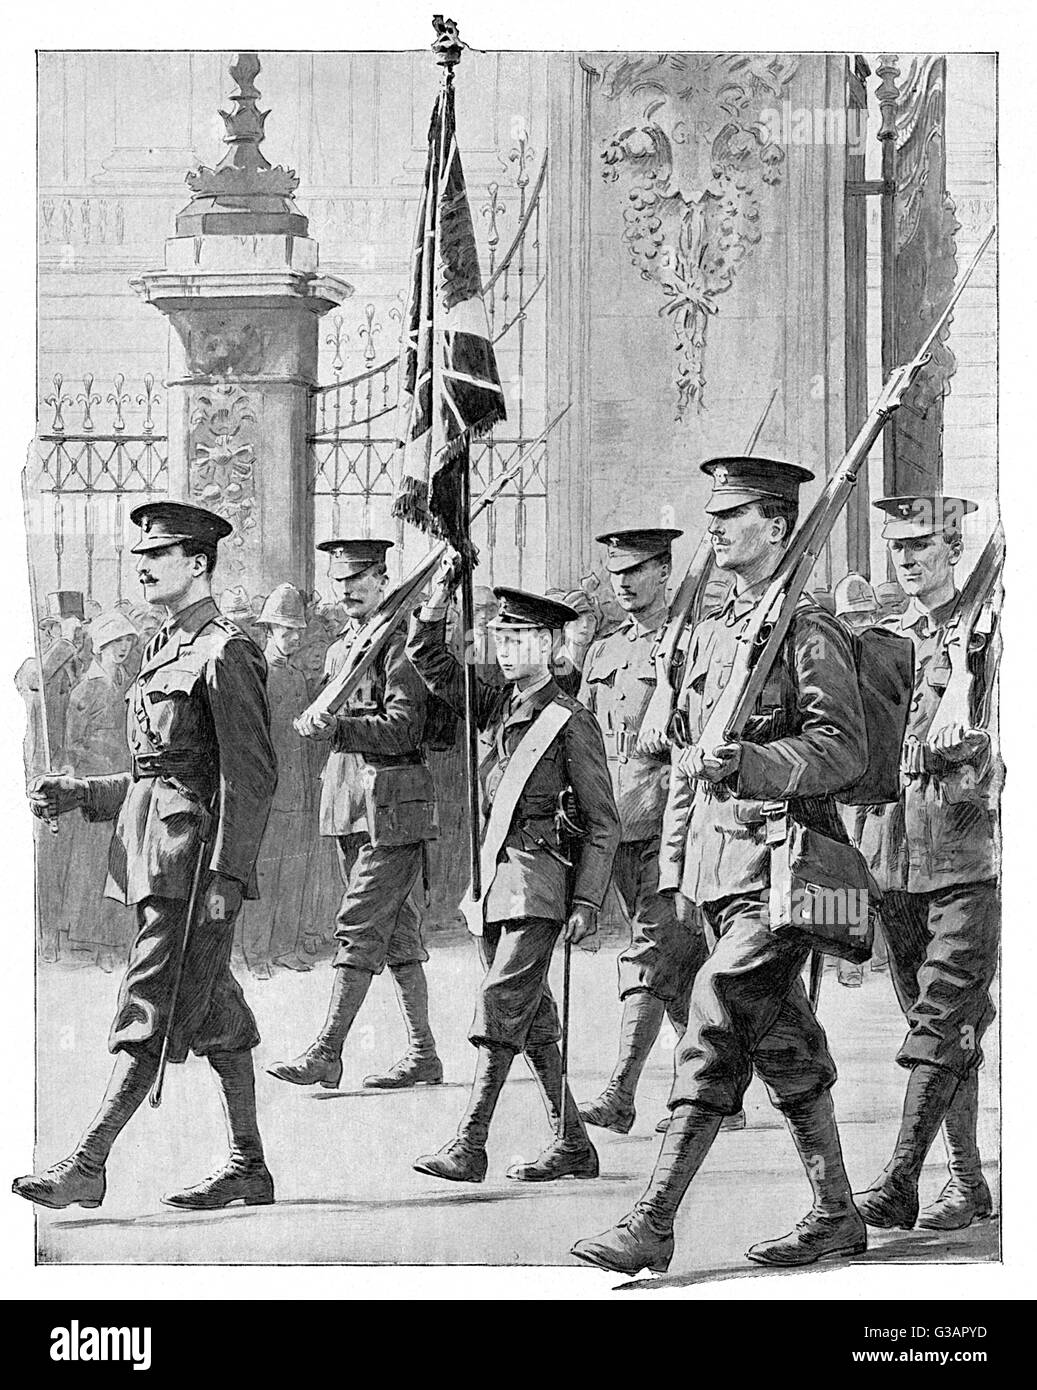 Edward, Prince of Wales (later King Edward VIII, then Duke of Windsor), parades with his fellow Grenadier Guards (all of whom are considerably taller than him) and carries the regimental flag in front of Buckingham Palace in October 1914.  The Prince woul Stock Photo